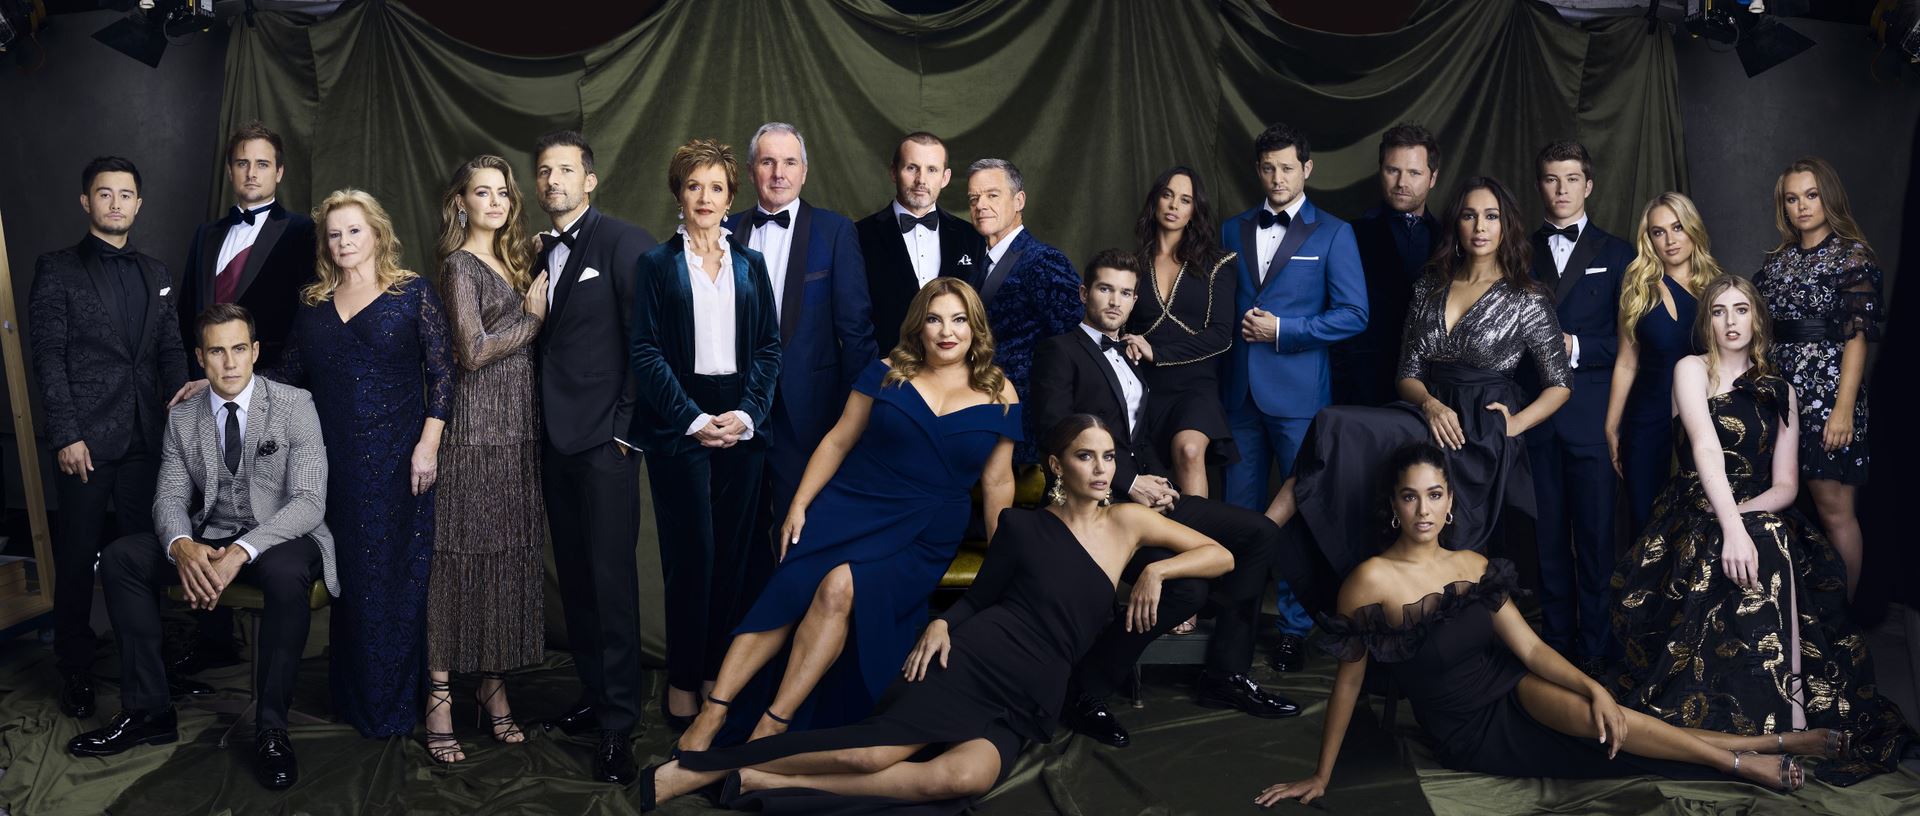 The main cast members of Neighbours, wearing suits and formal dresses and posing for a photo in a studio.